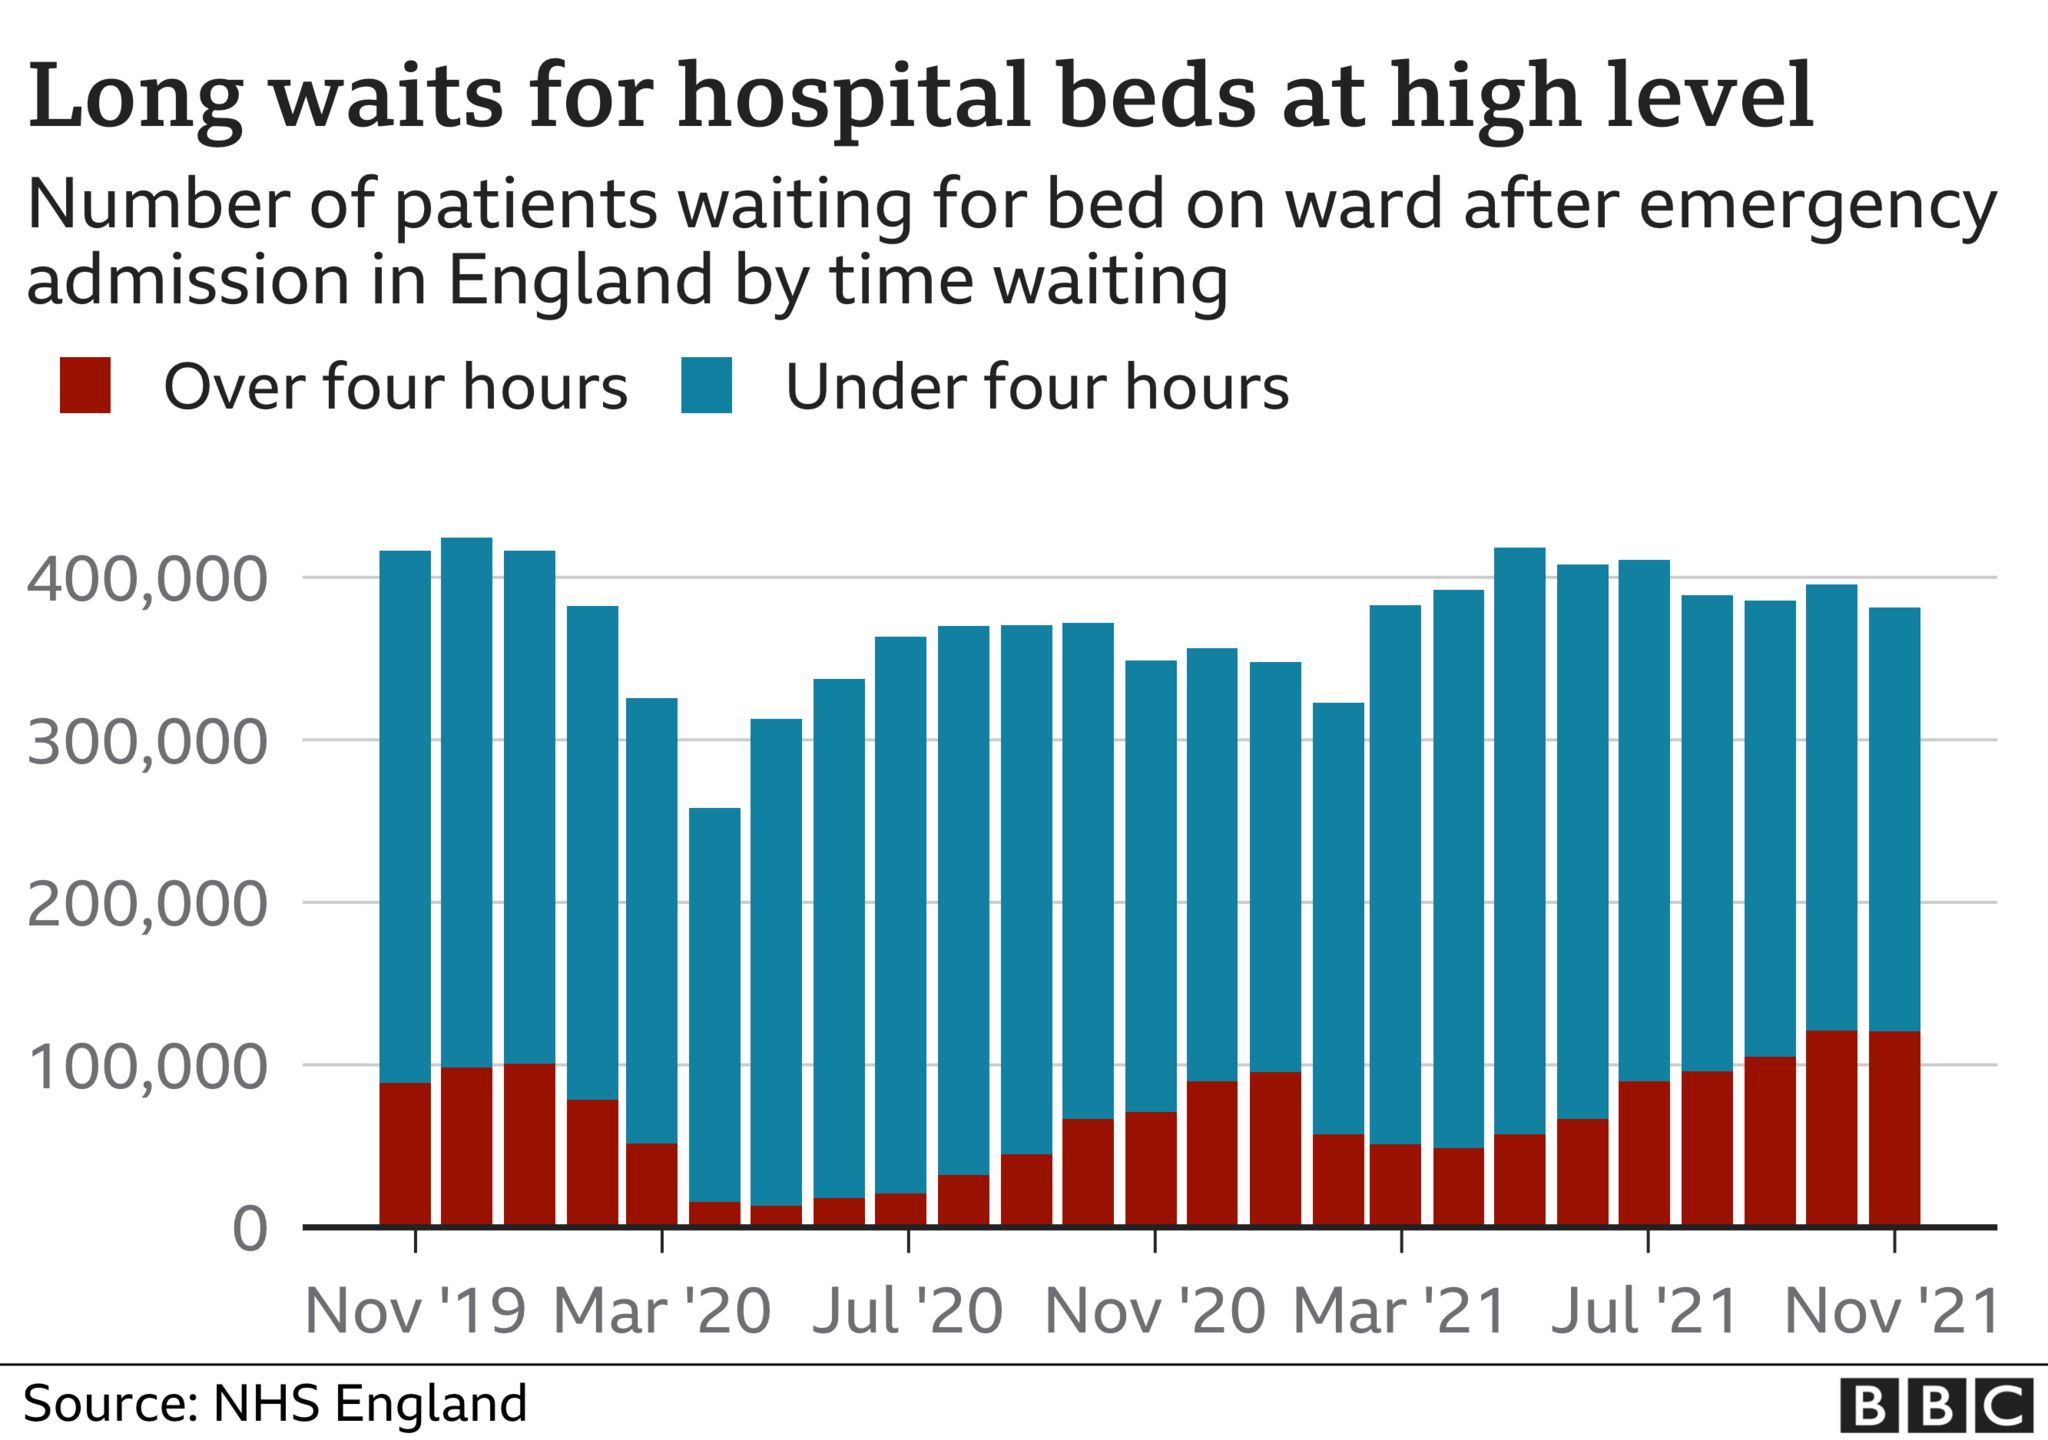 Chart showing waits for hospital beds